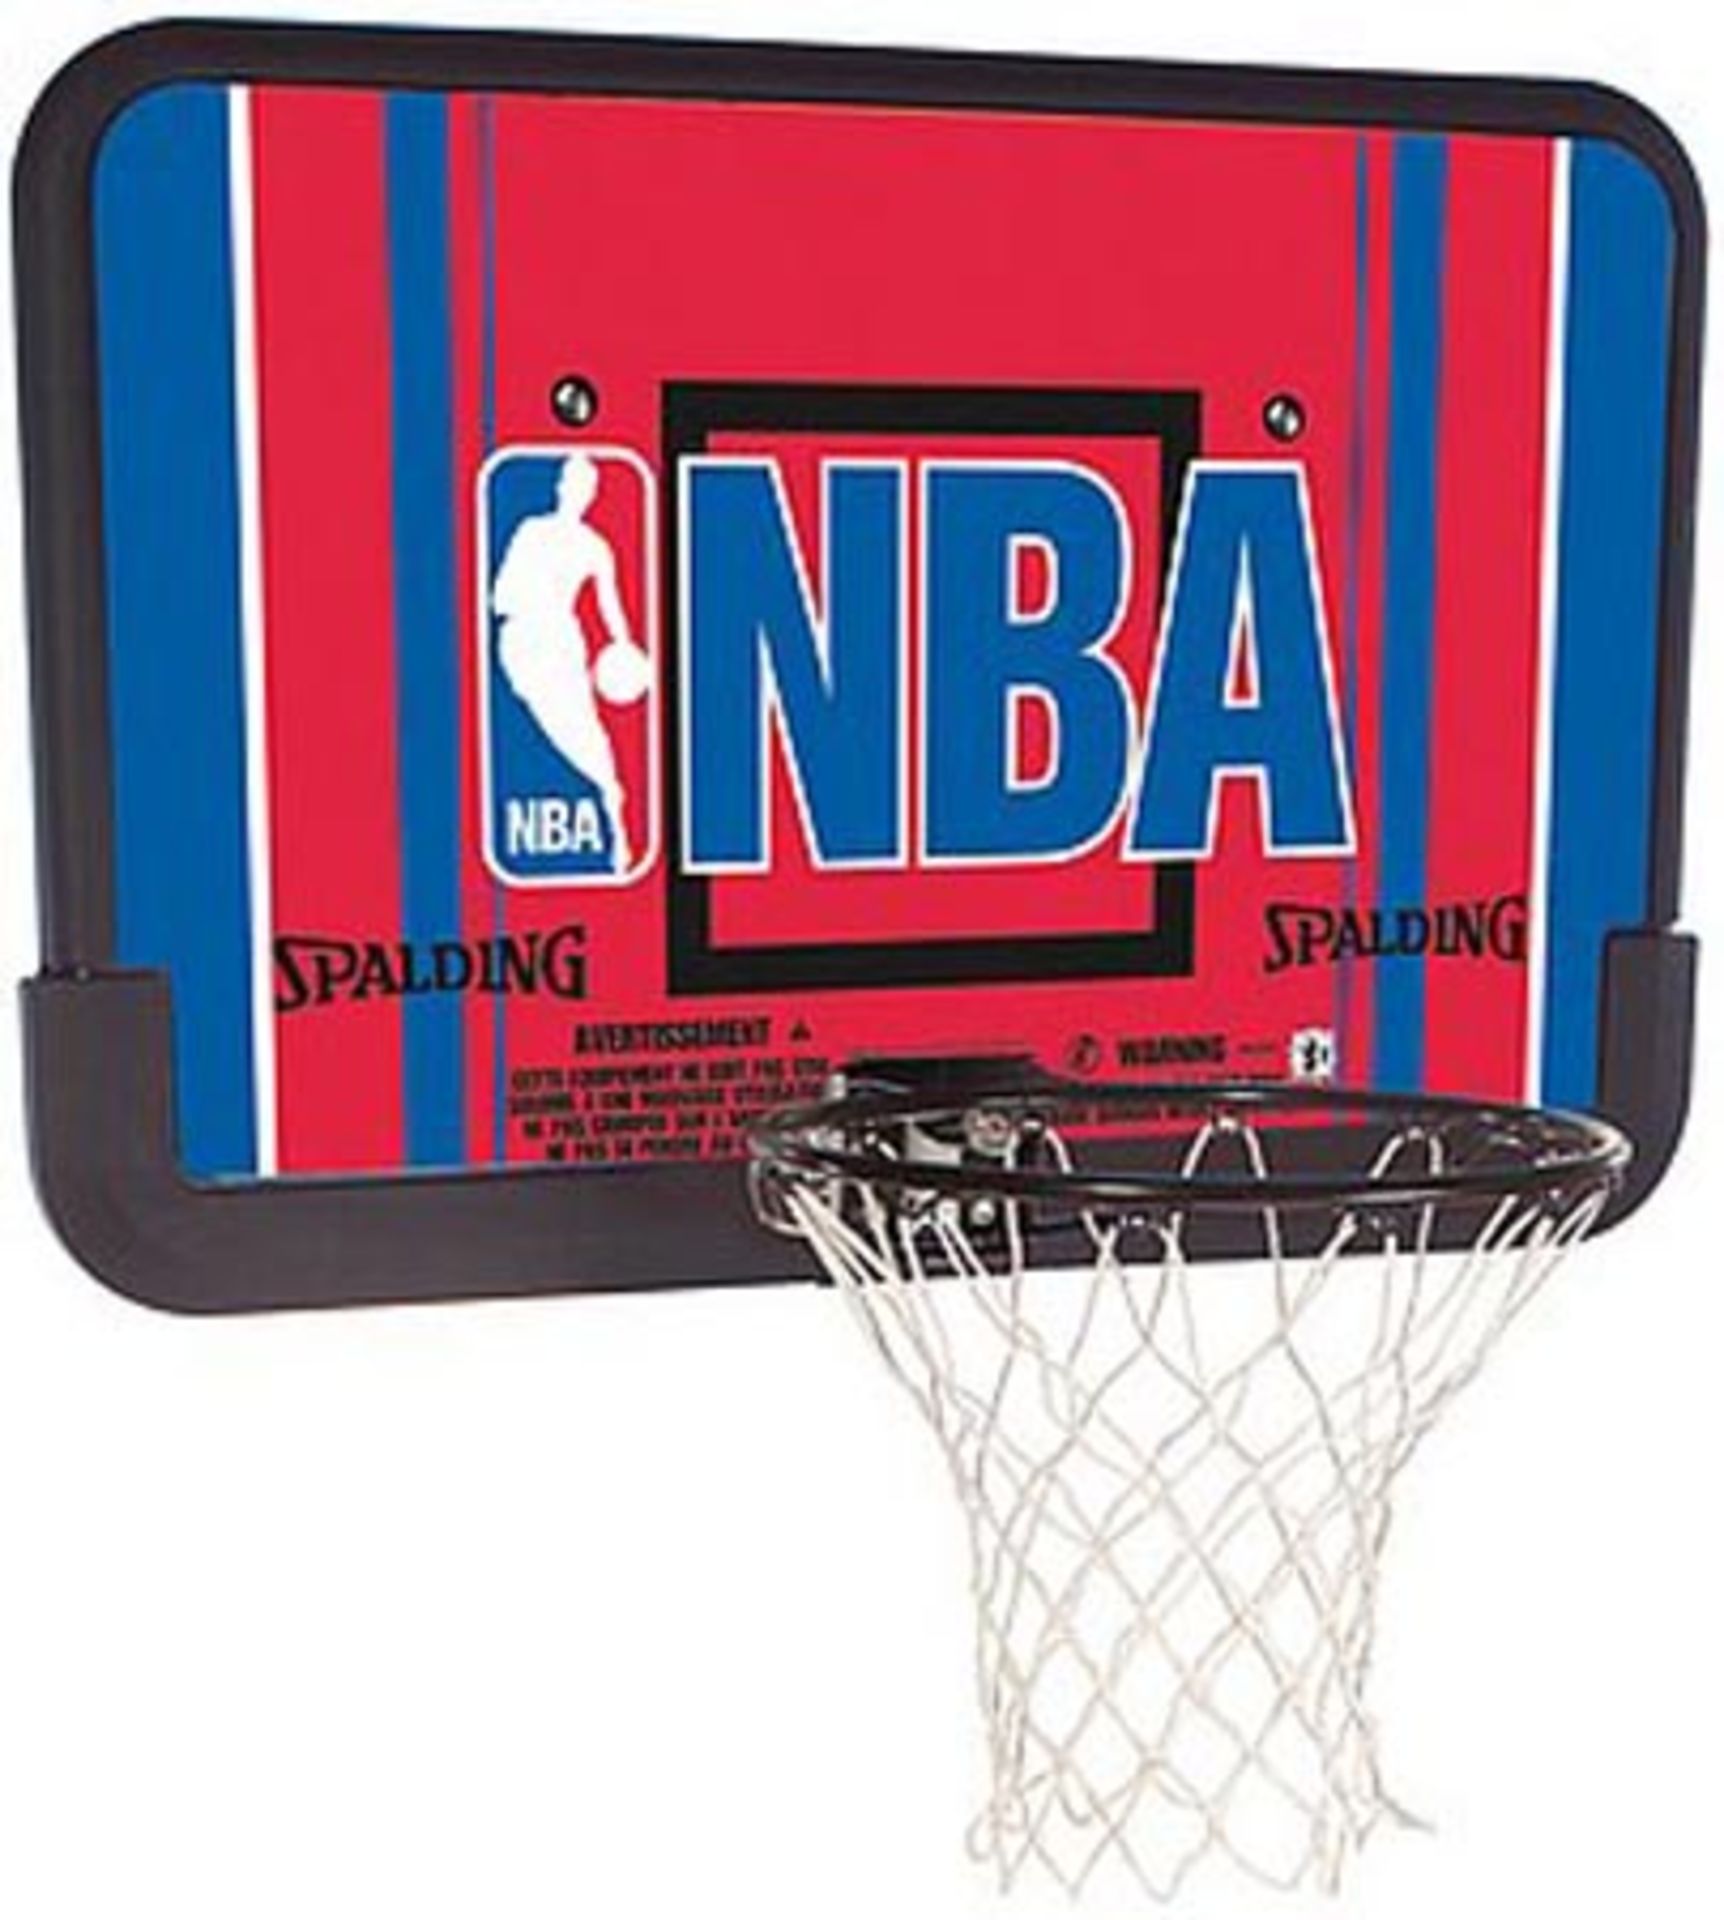 V Brand New Spalding 44" Eco-Composite NBA BasketBall Hoop with Back Board *ITEM IS BLUE AND